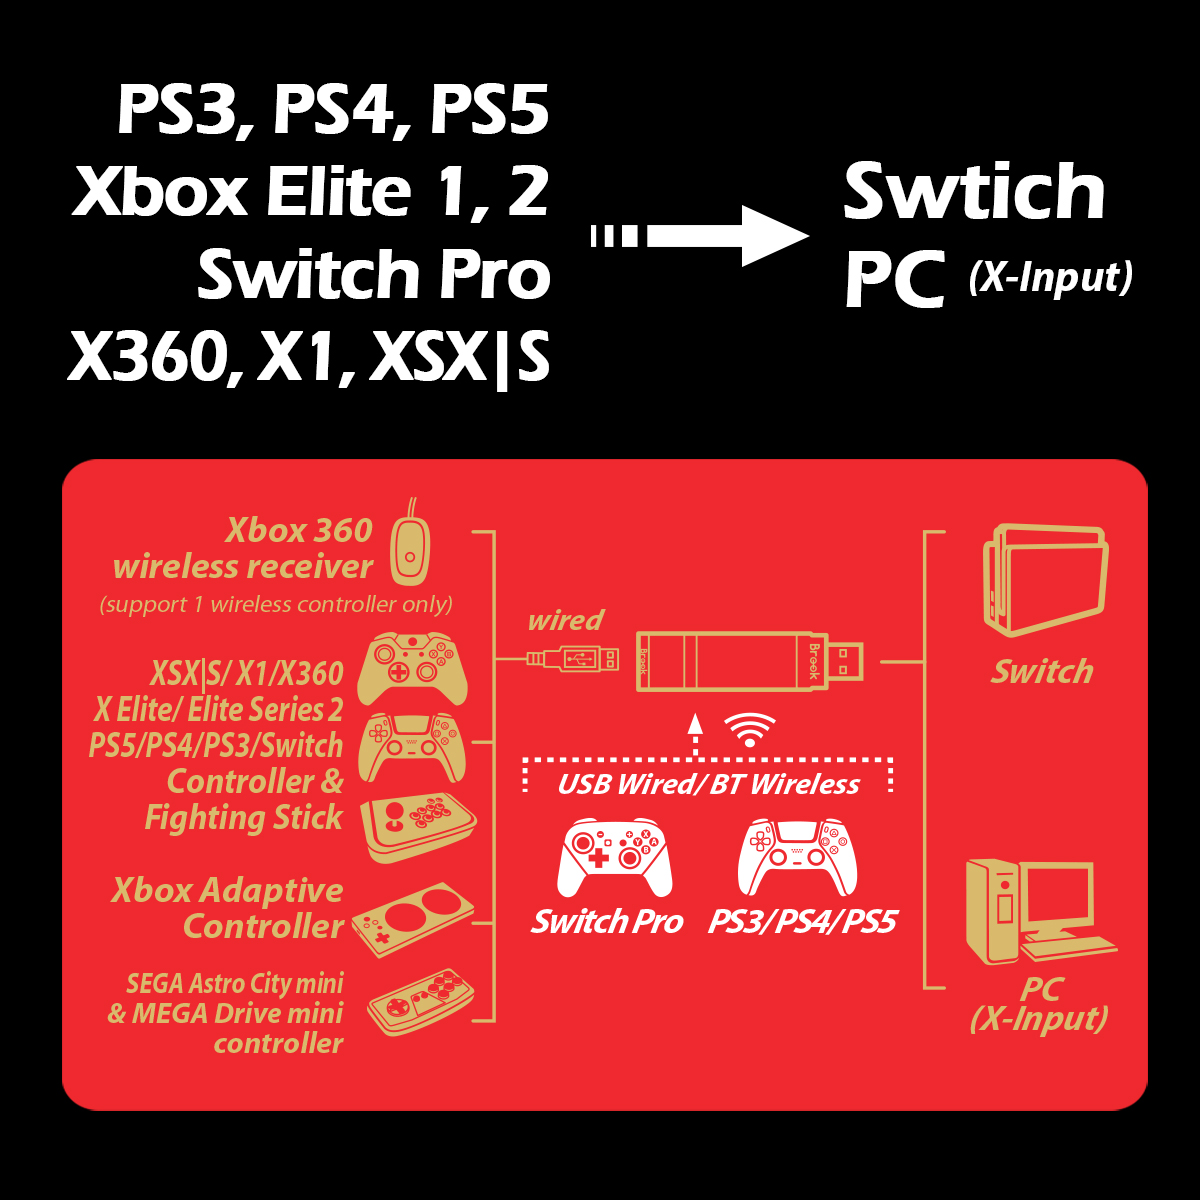 PS3 Vs. Xbox 360 Features